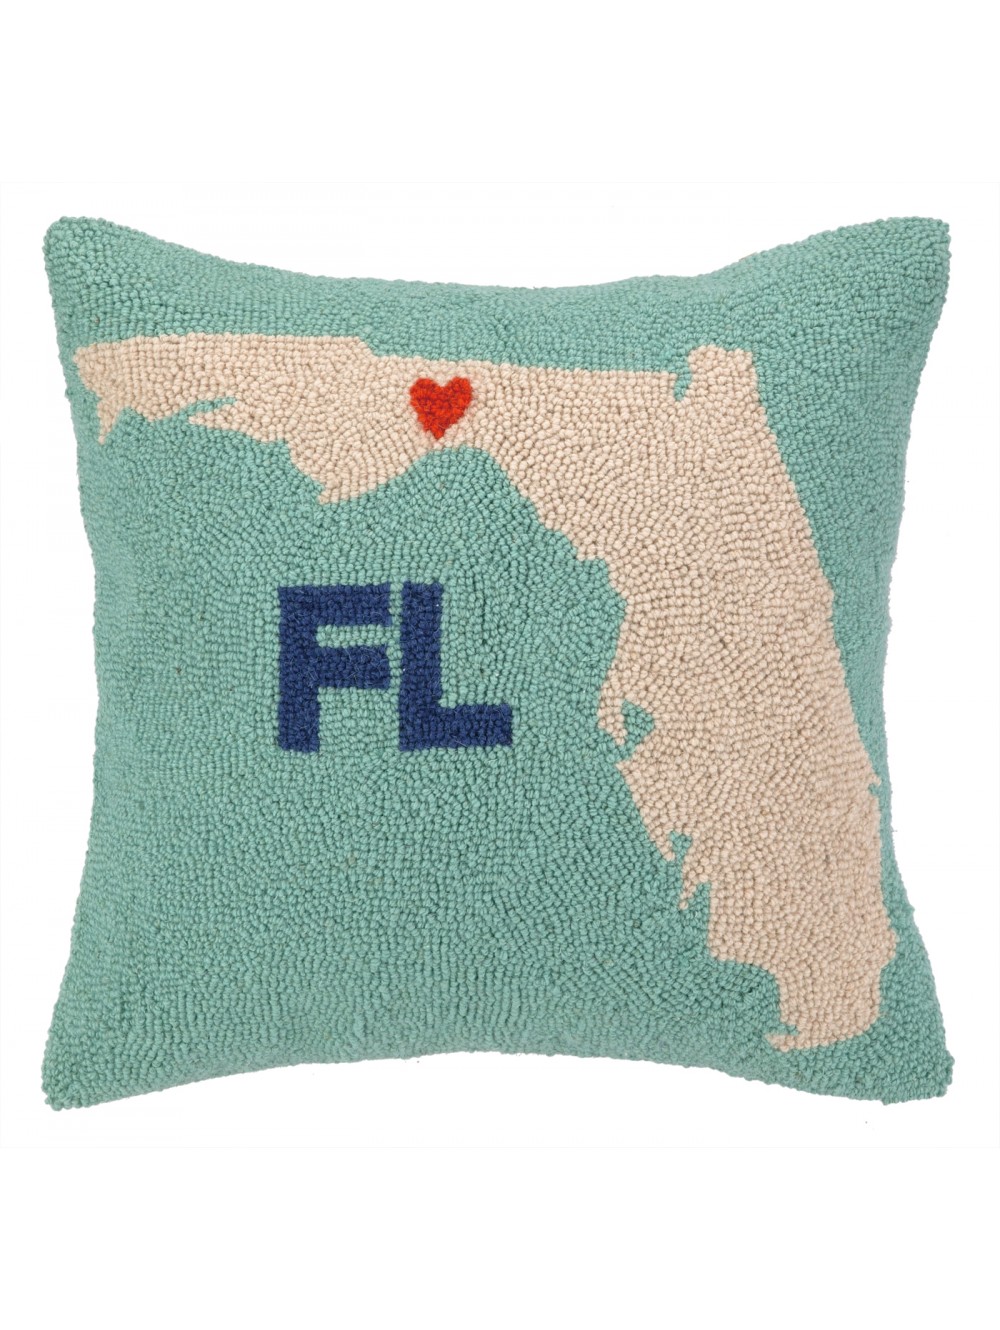 My Heart In Florida Pillow